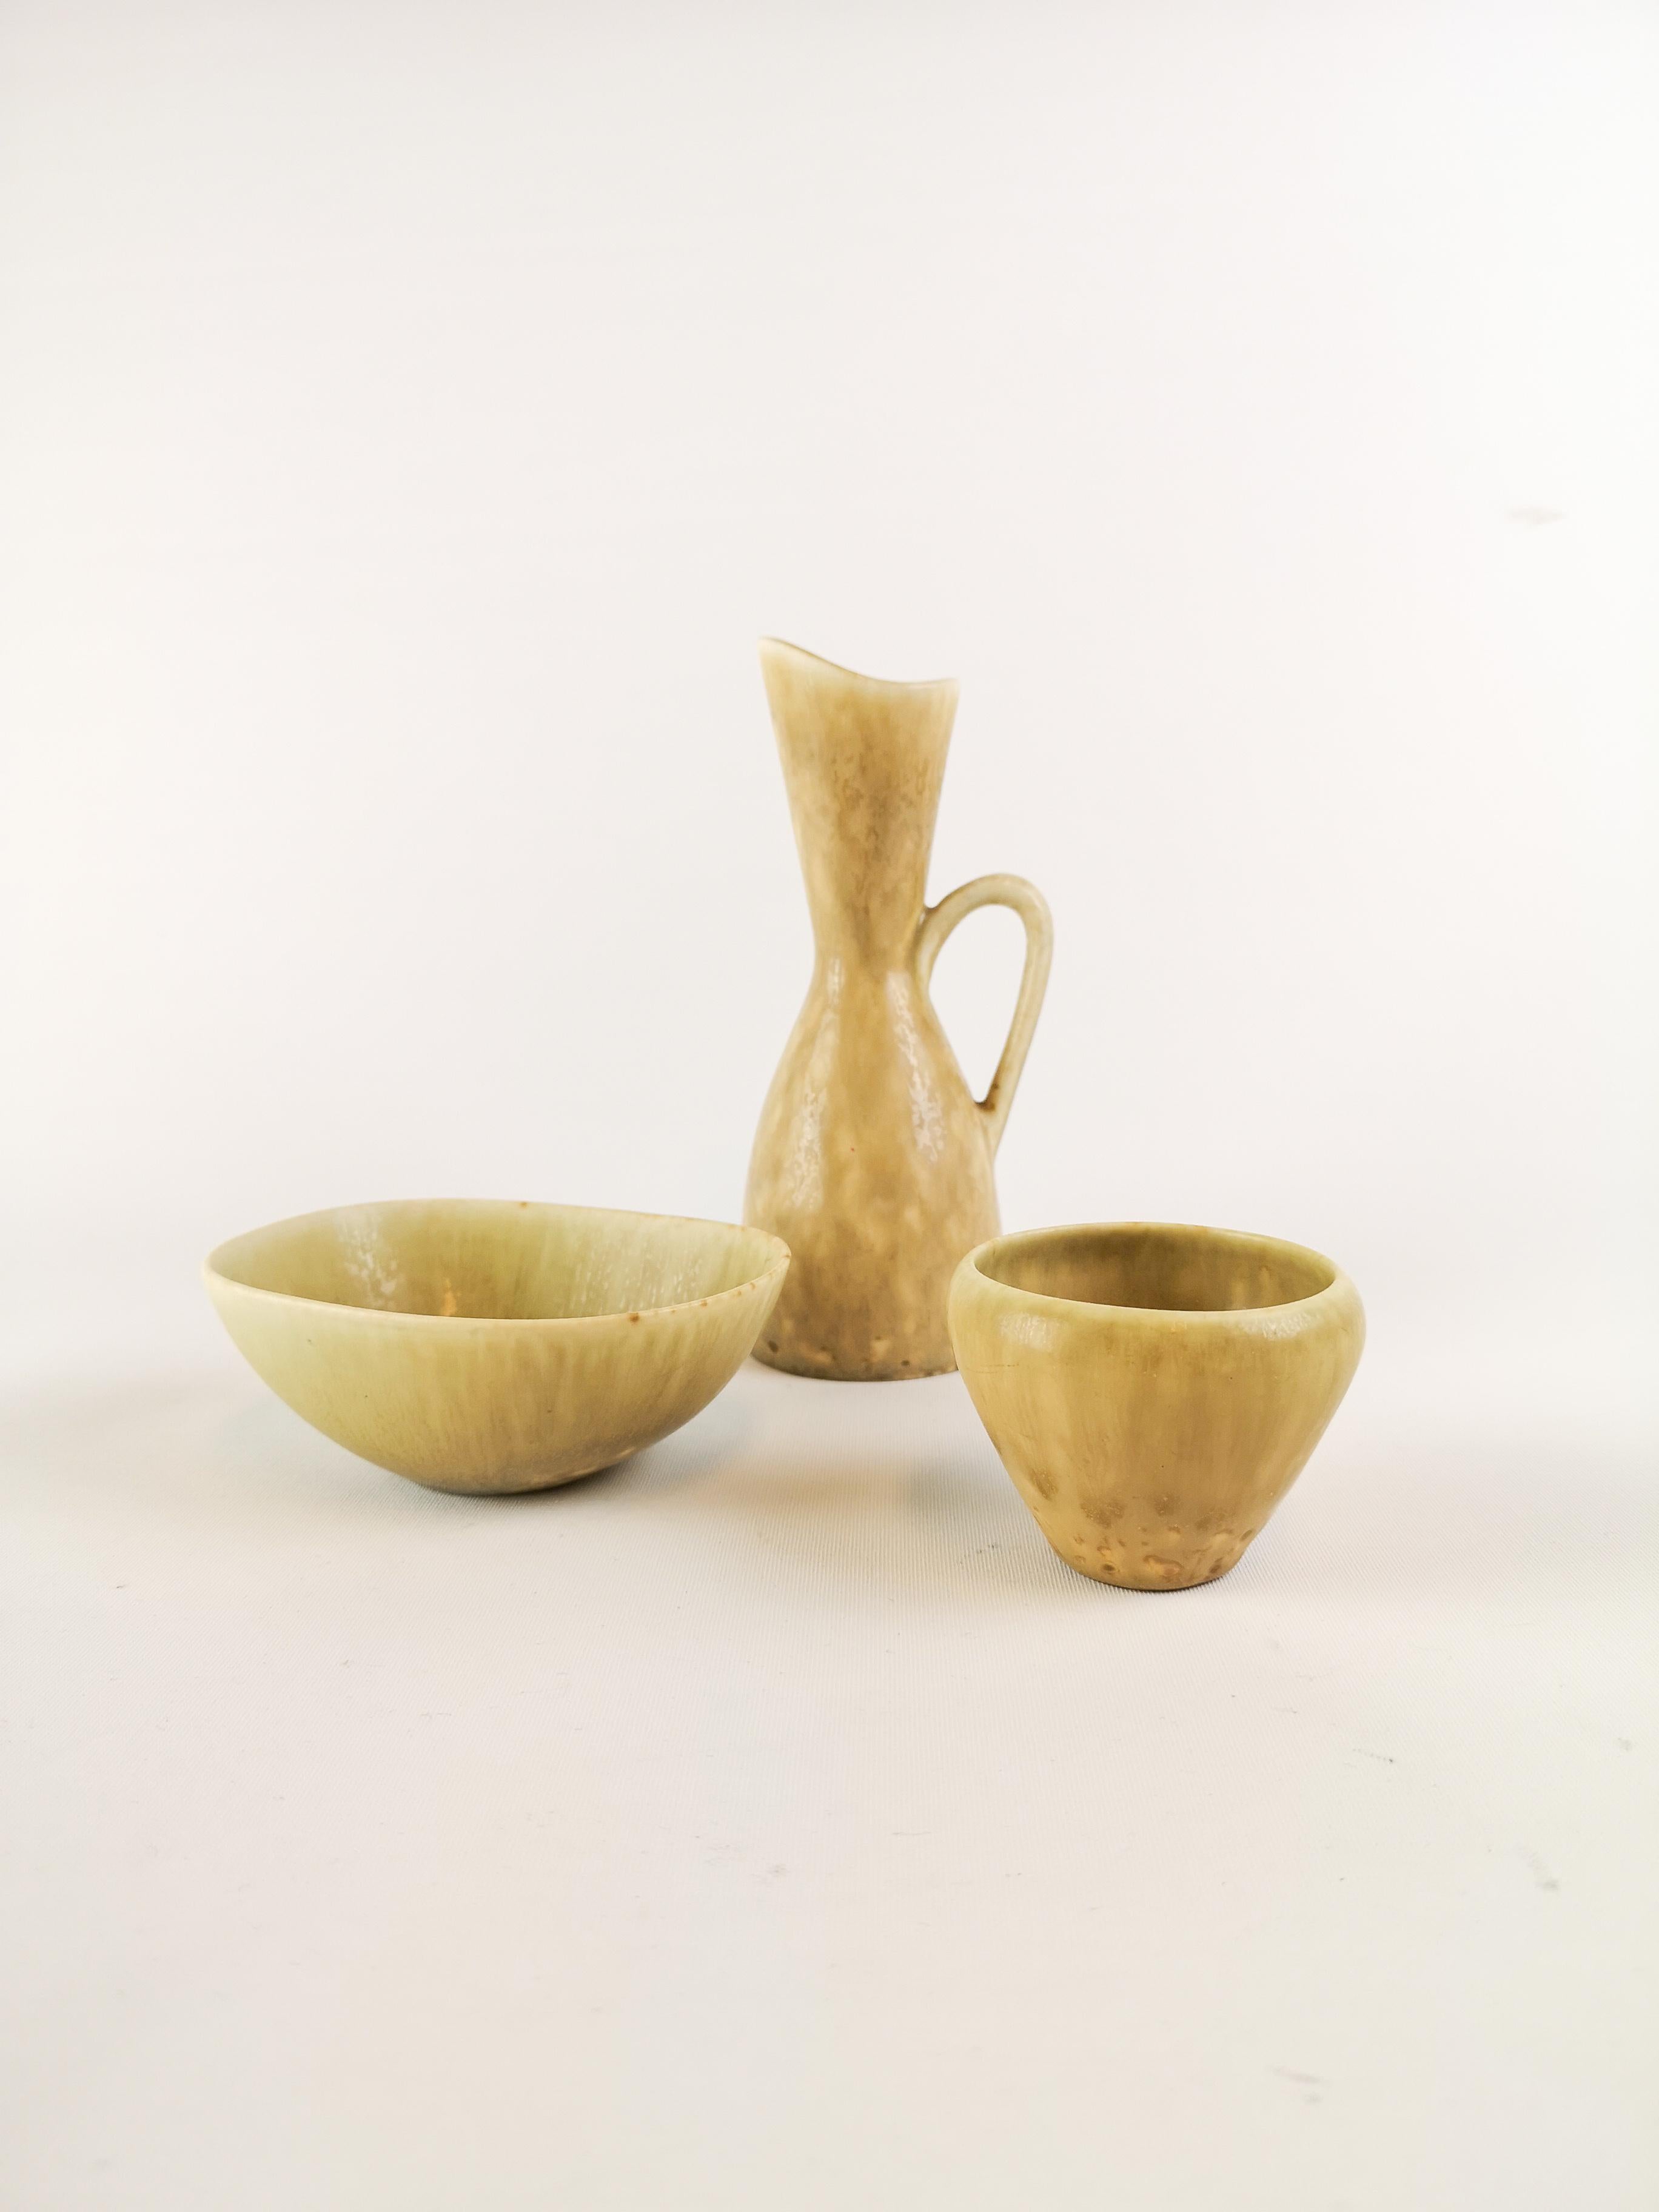 Very nice set of 2 small bowls and one small vase. Made in Sweden in the 1950s and designed by Stålhane. The famous factory Rörstrand was the manufacture. 

Good condition

Measures Bowls 12x10x4 cm and 7 x5,5 cm Vase H 17 cm D 7 cm